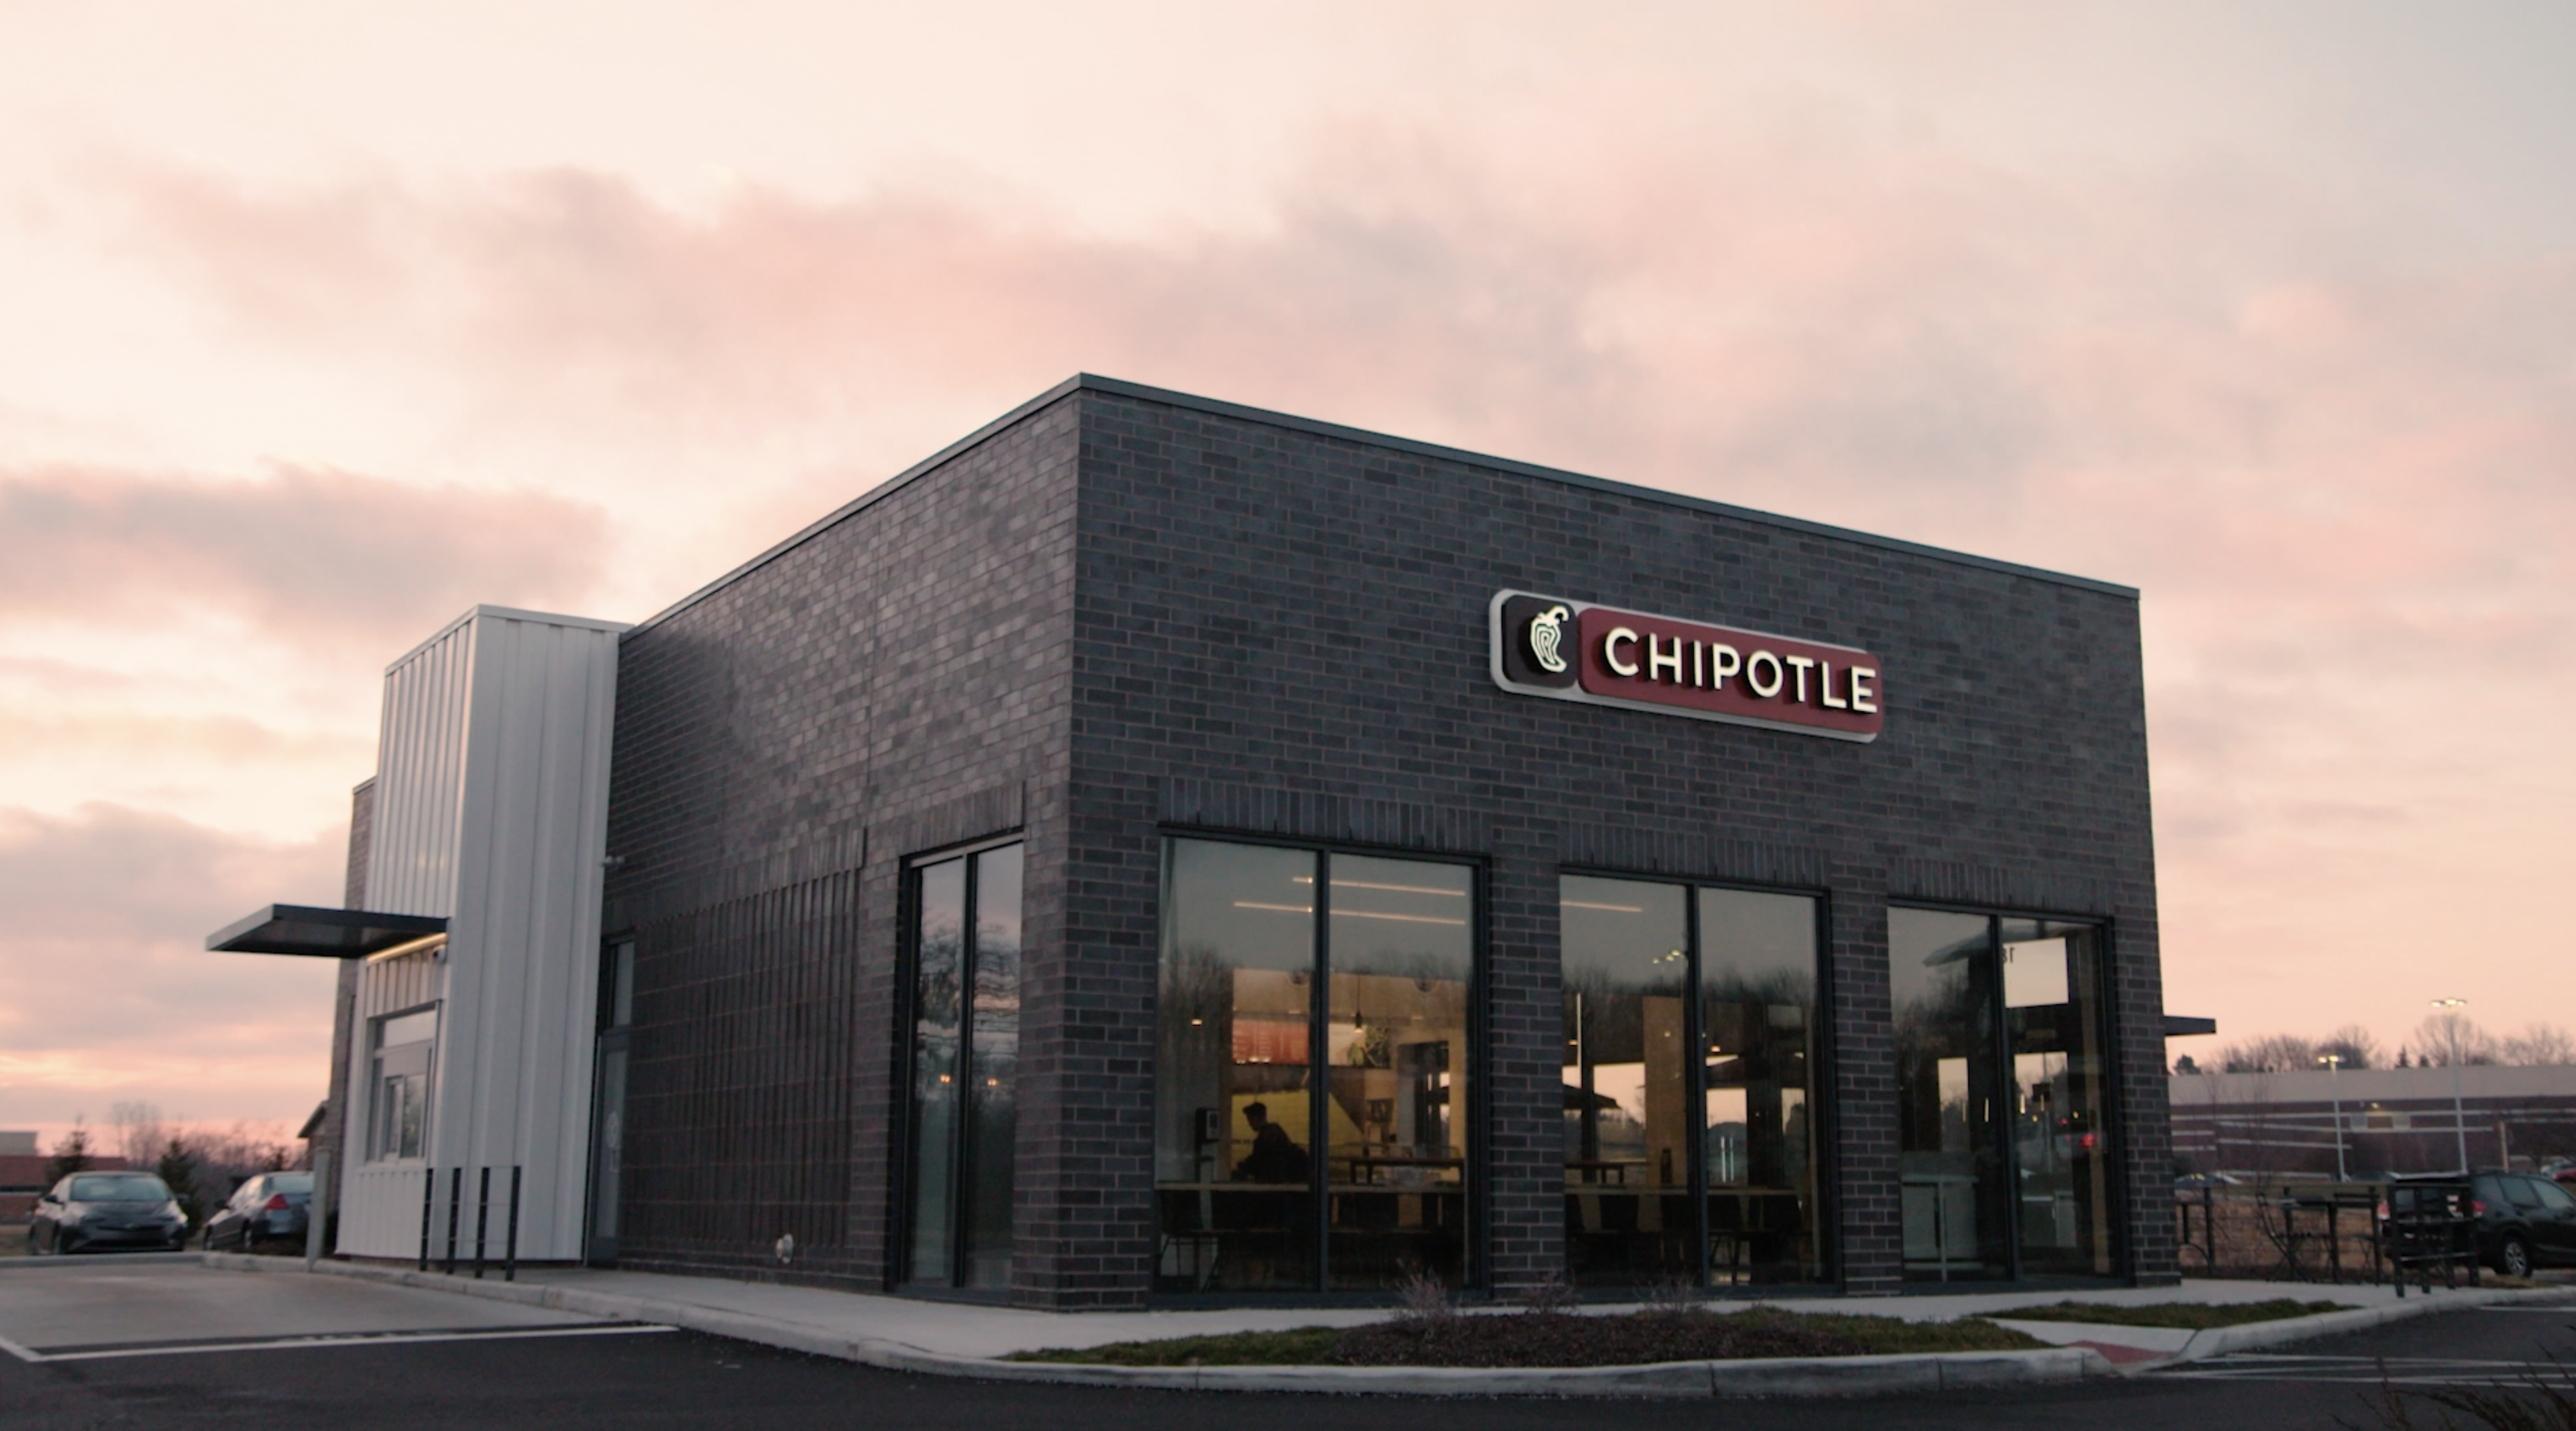 Chipotle's designs for new restaurants with drive-thru facilities. (Credit: Chipotle)